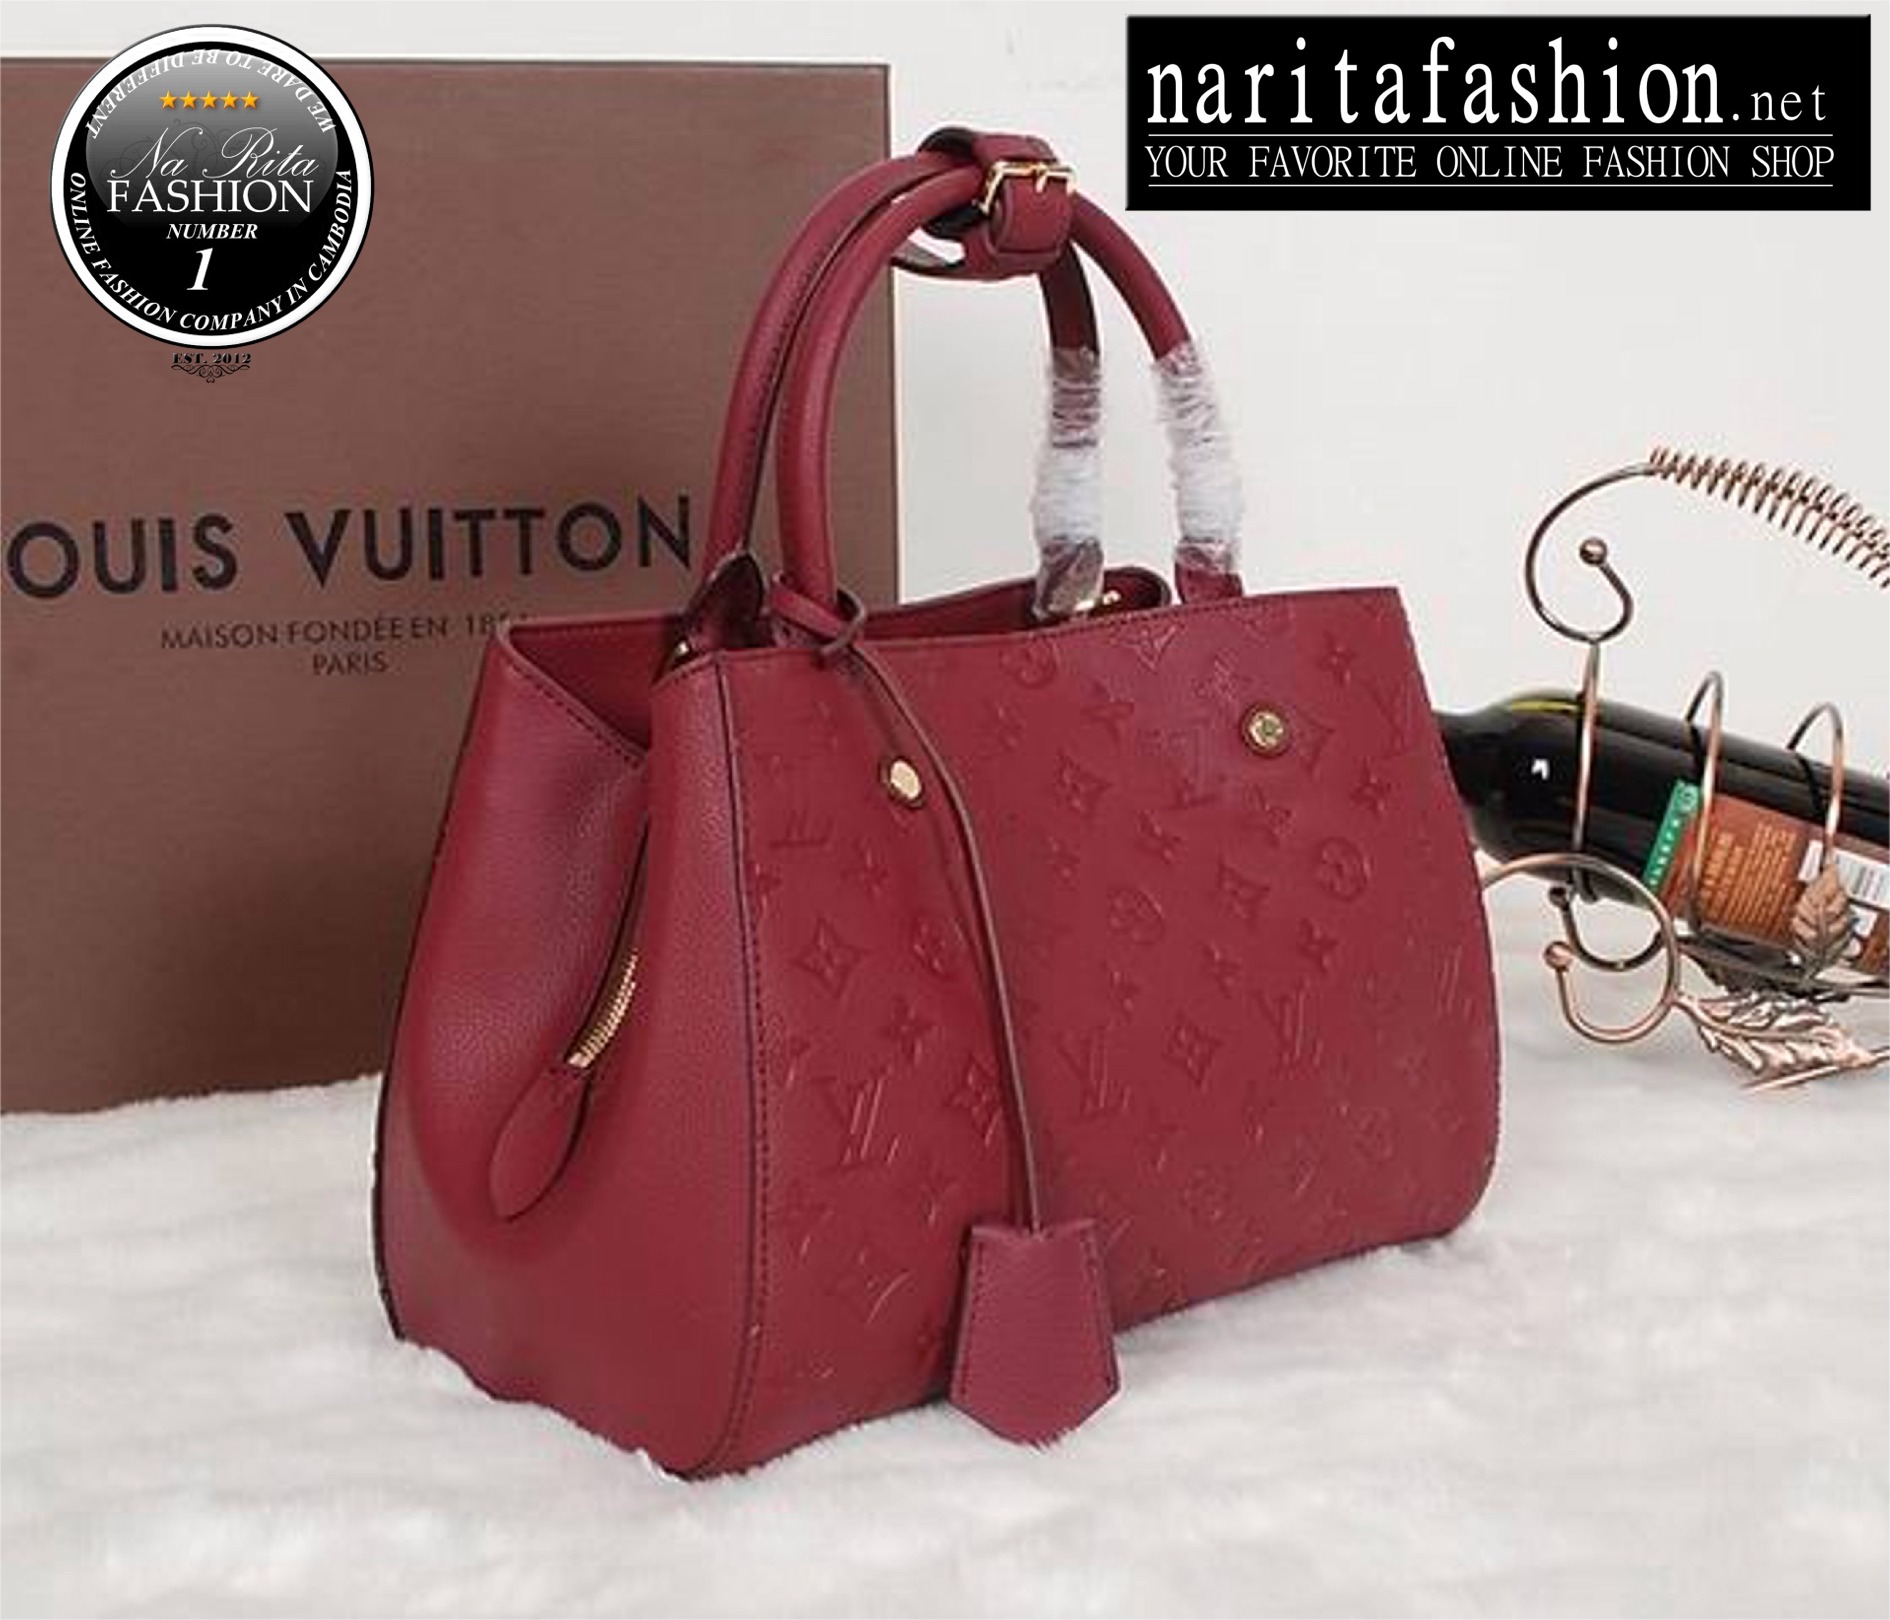 Check out some of our LV 2015 collection – Na Rita Fashion